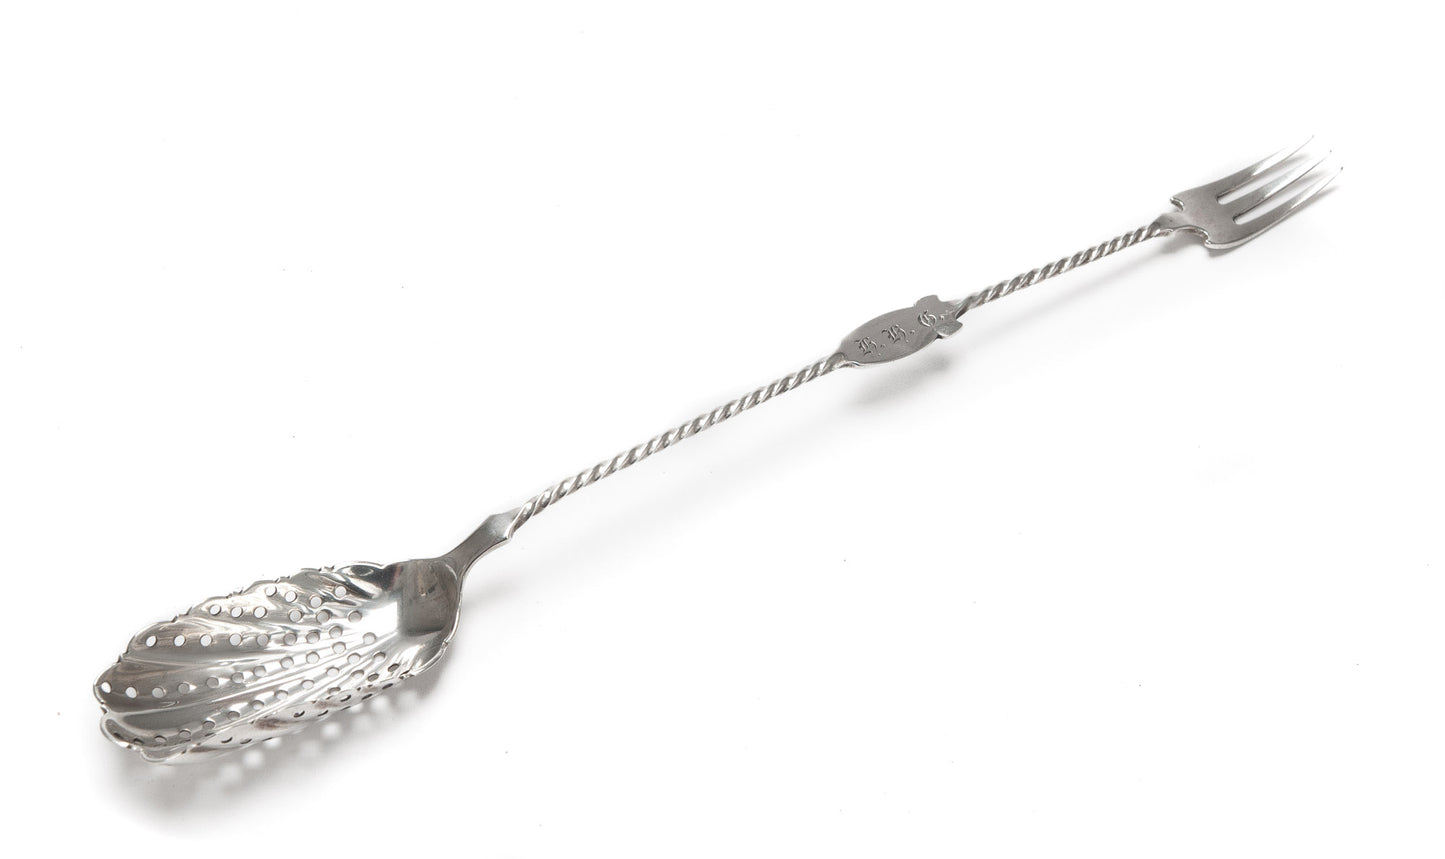 Antique Mid 19th Century American Coin Silver Pickle Fork with Rope Twist Handle (Code 2087)